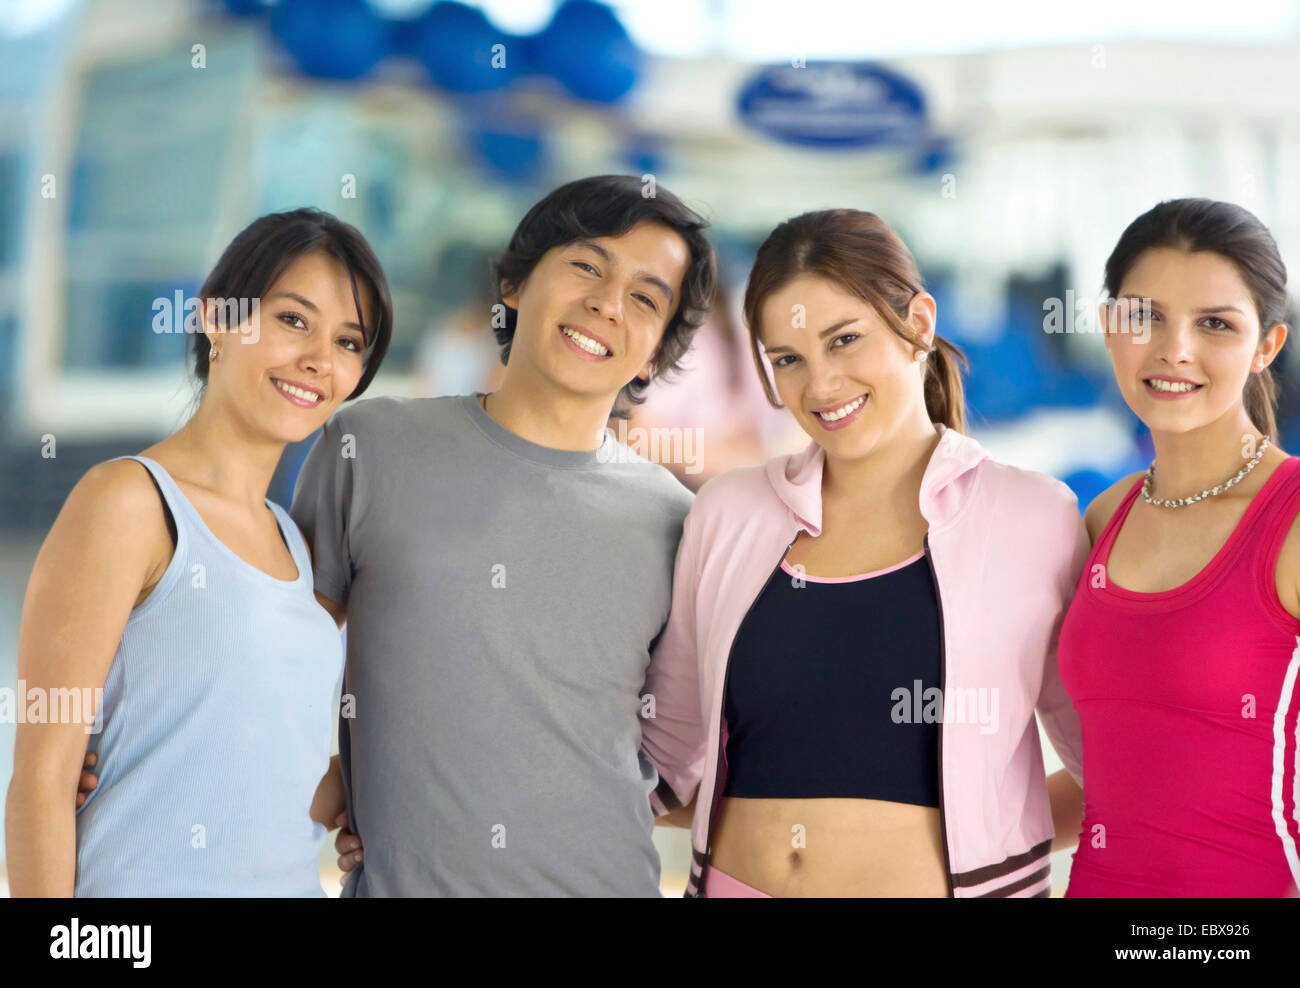 group of people at the gym smiling Stock Photo